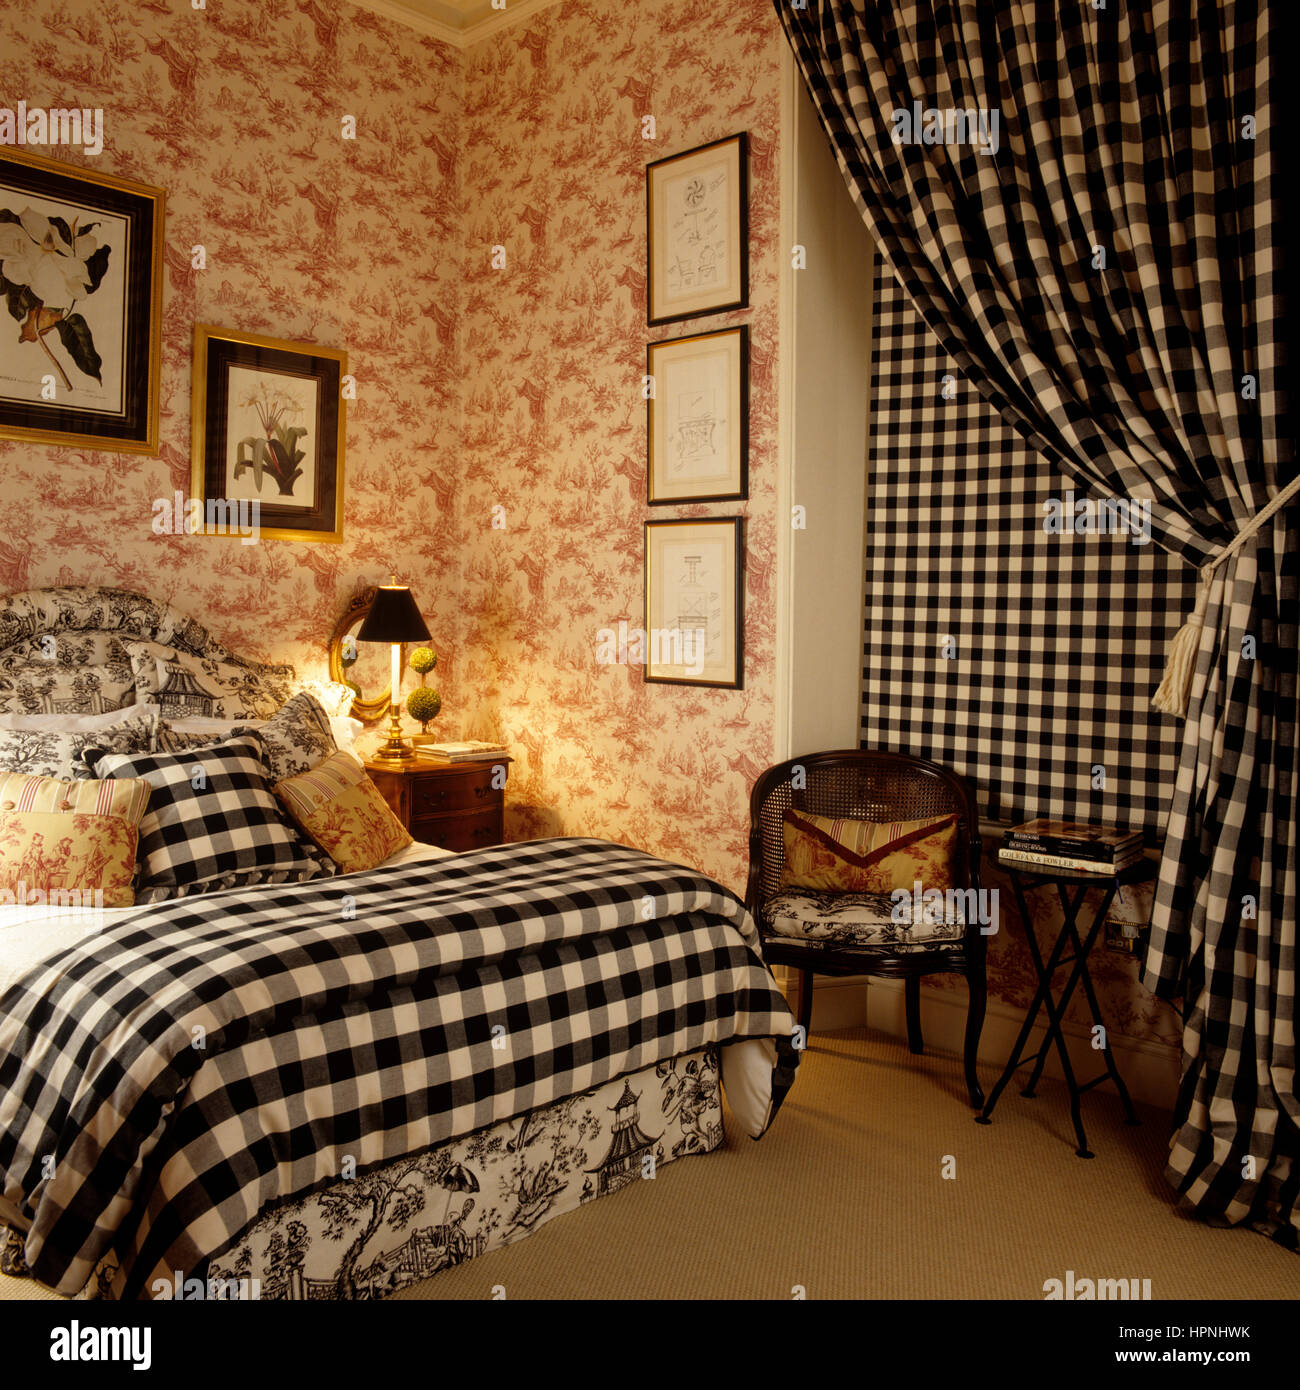 A check patterned bedroom. Stock Photo